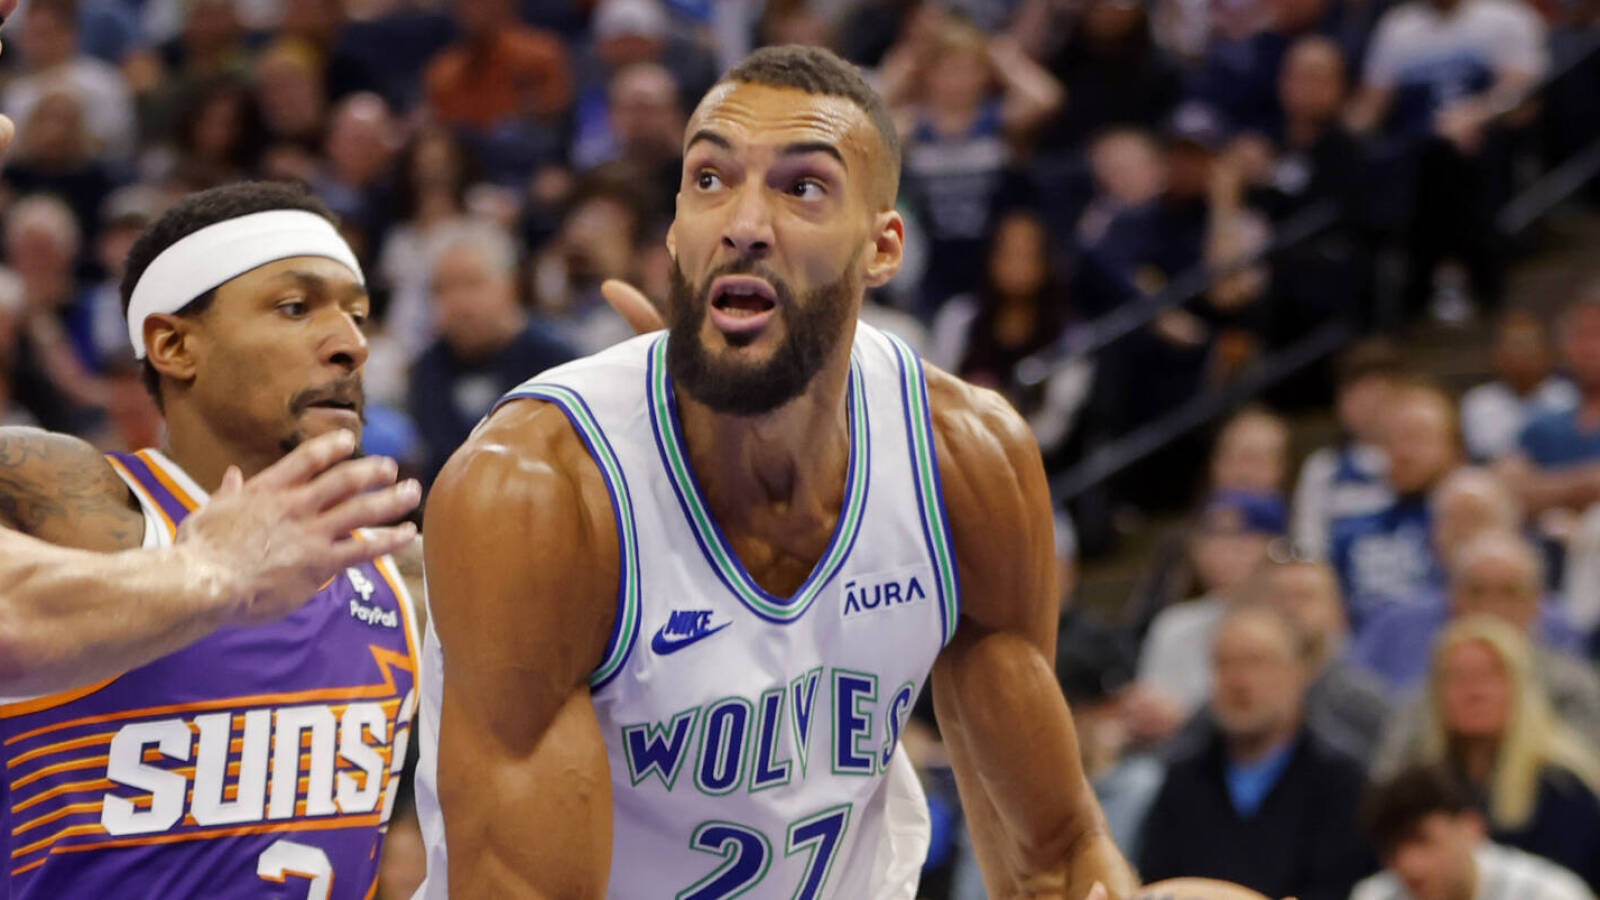 New dad Rudy Gobert to miss Game 2 but history shows he could have big return